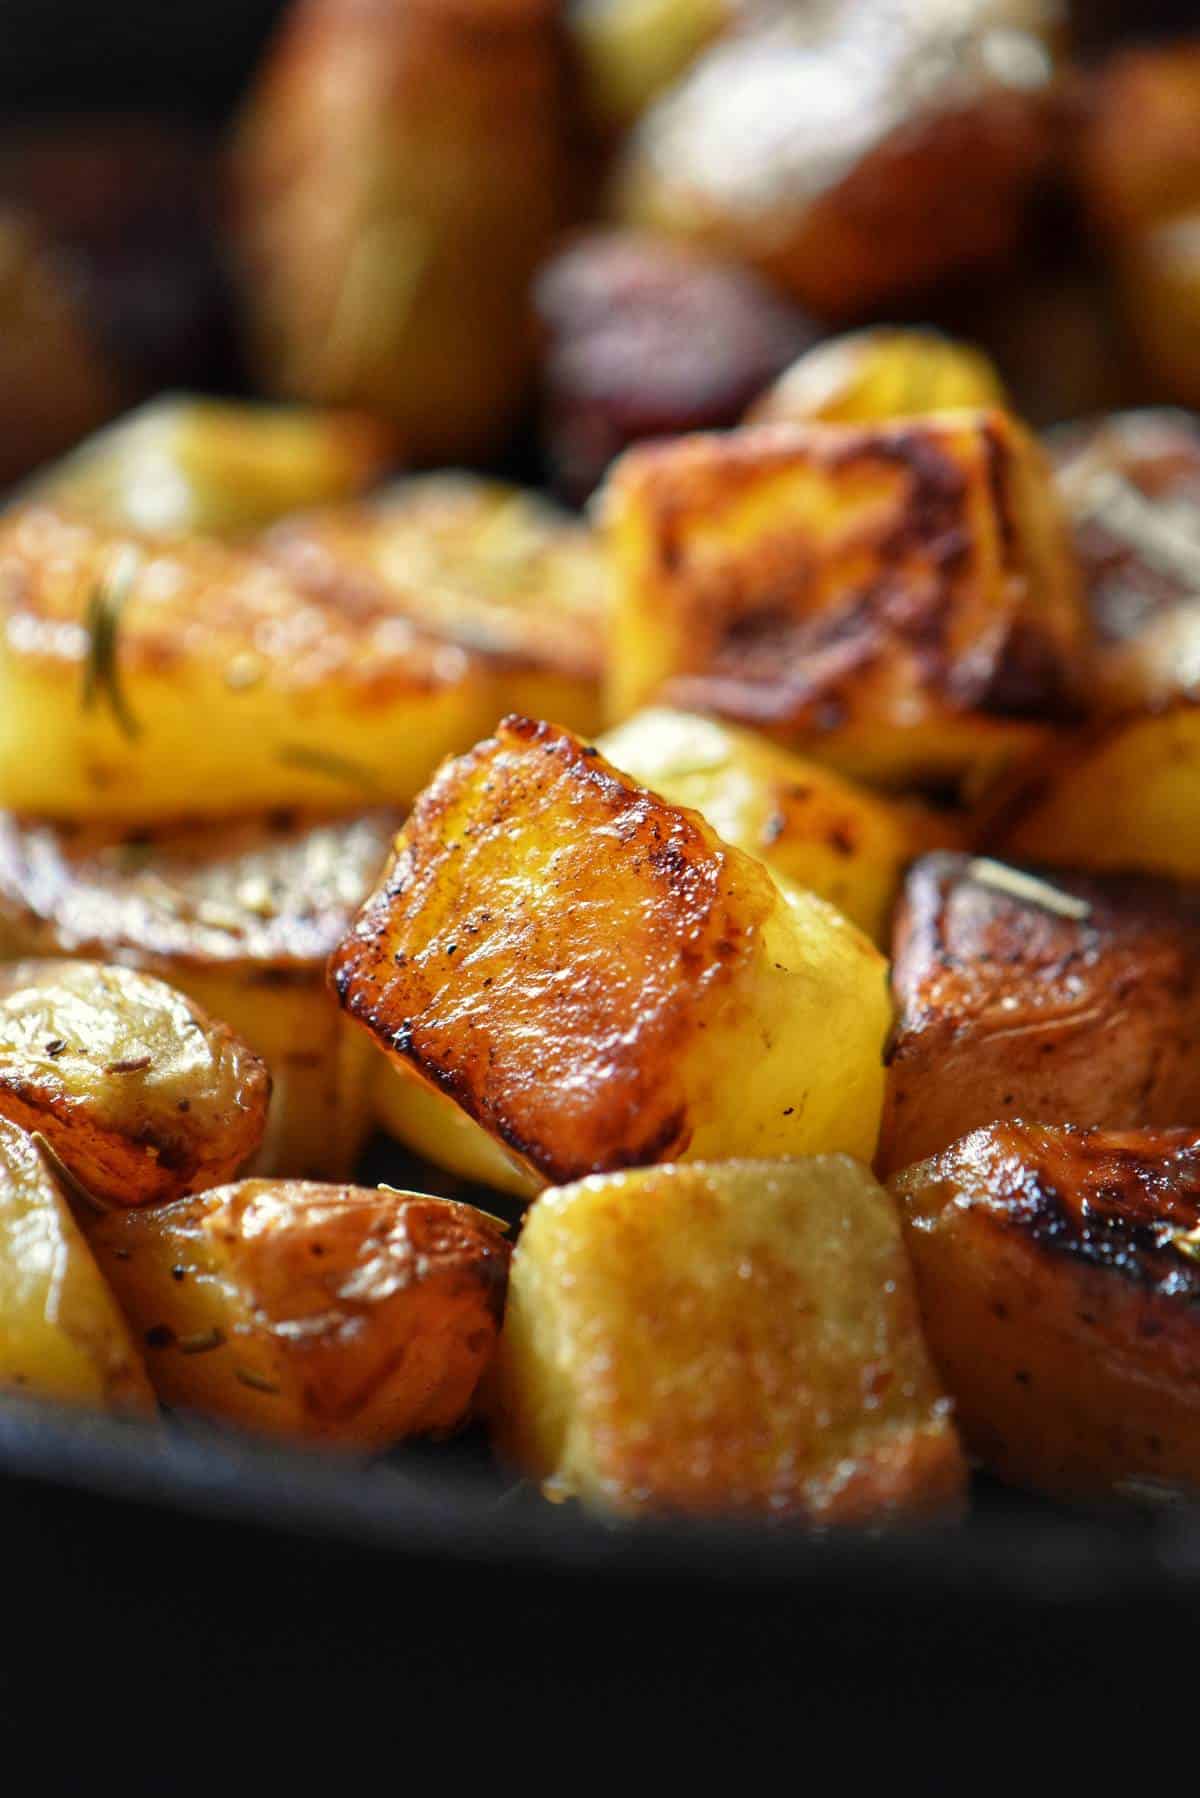 Crispy golden brown potatoes in a cast iron skillet.